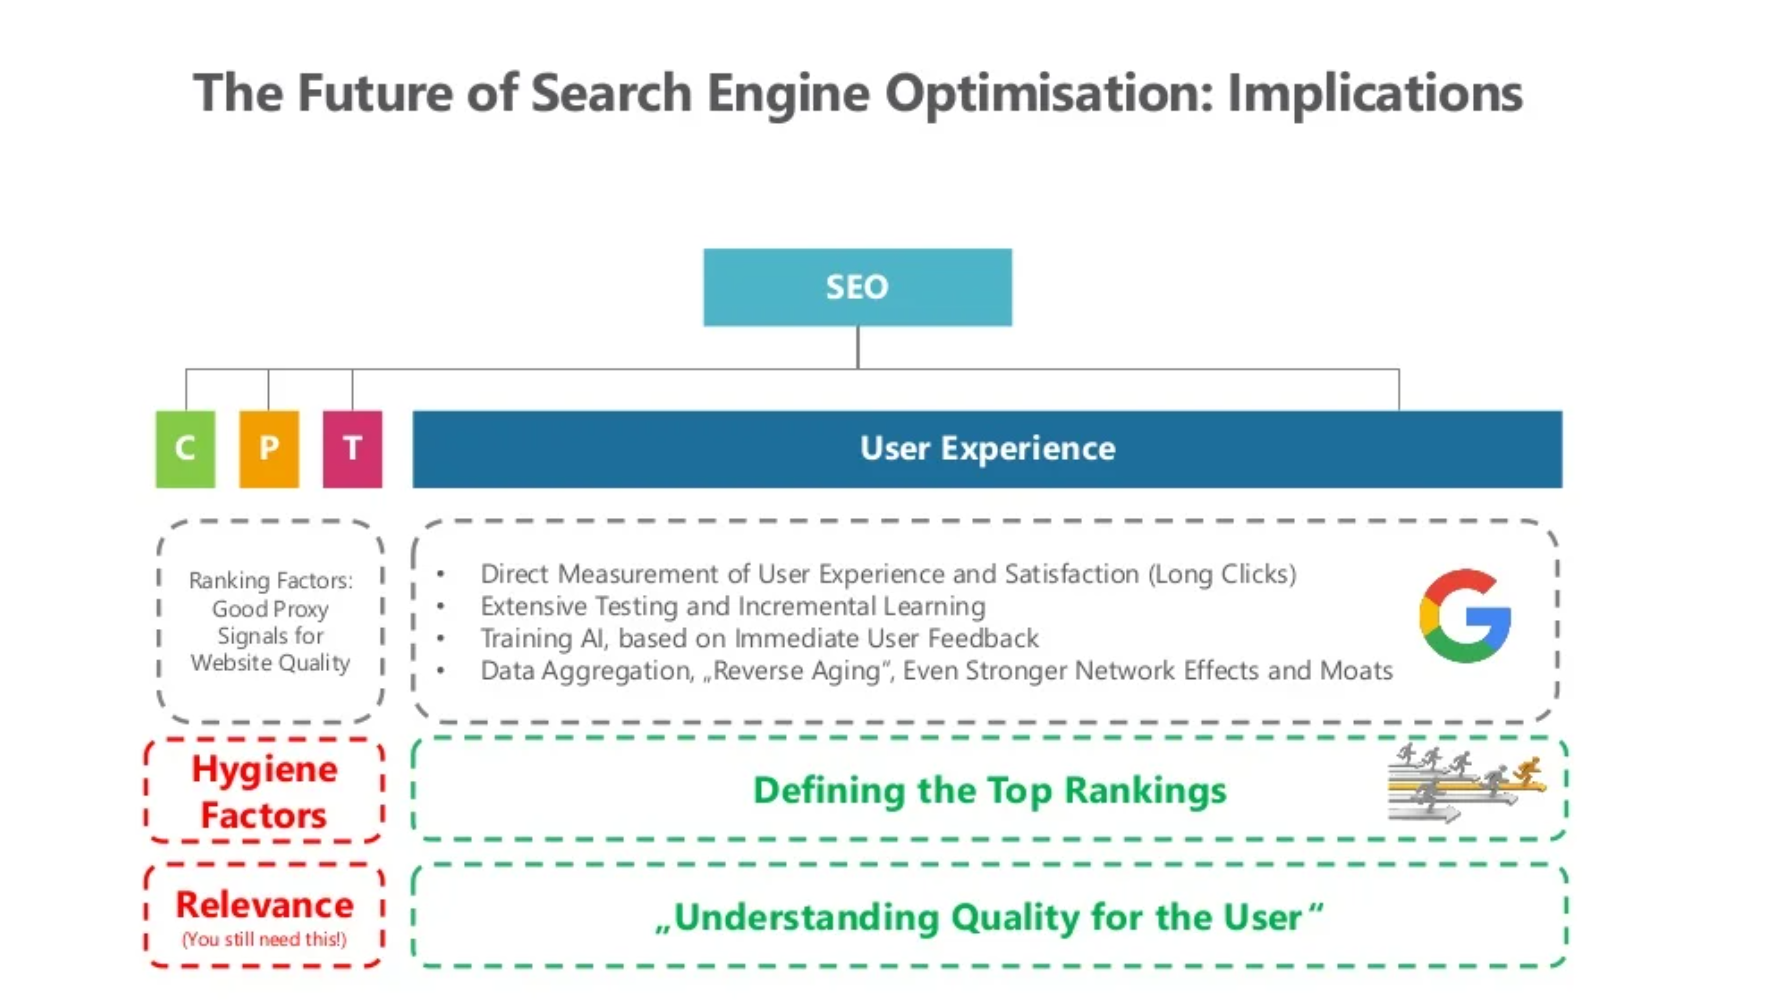 Search Experience statt Search Engine Optimisation